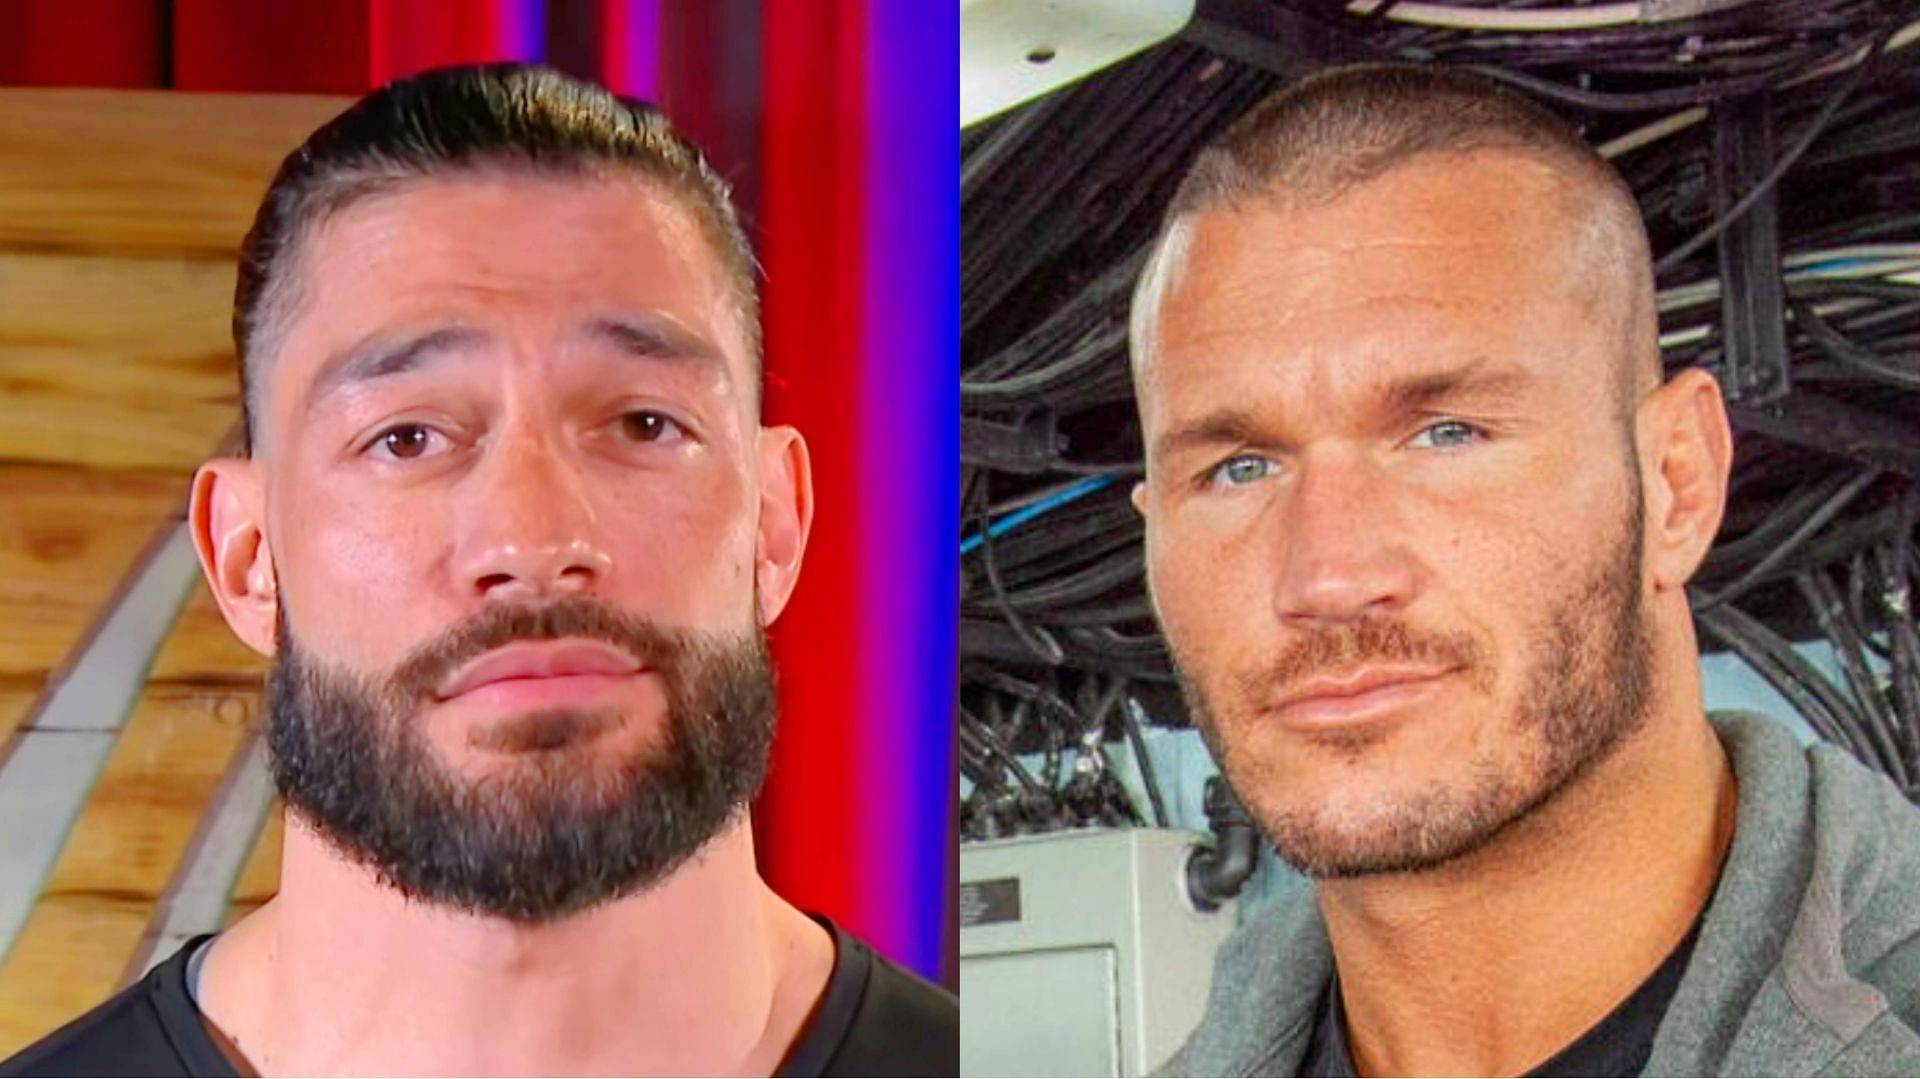 WWE Superstars Roman Reigns (left) and Randy Orton (right)